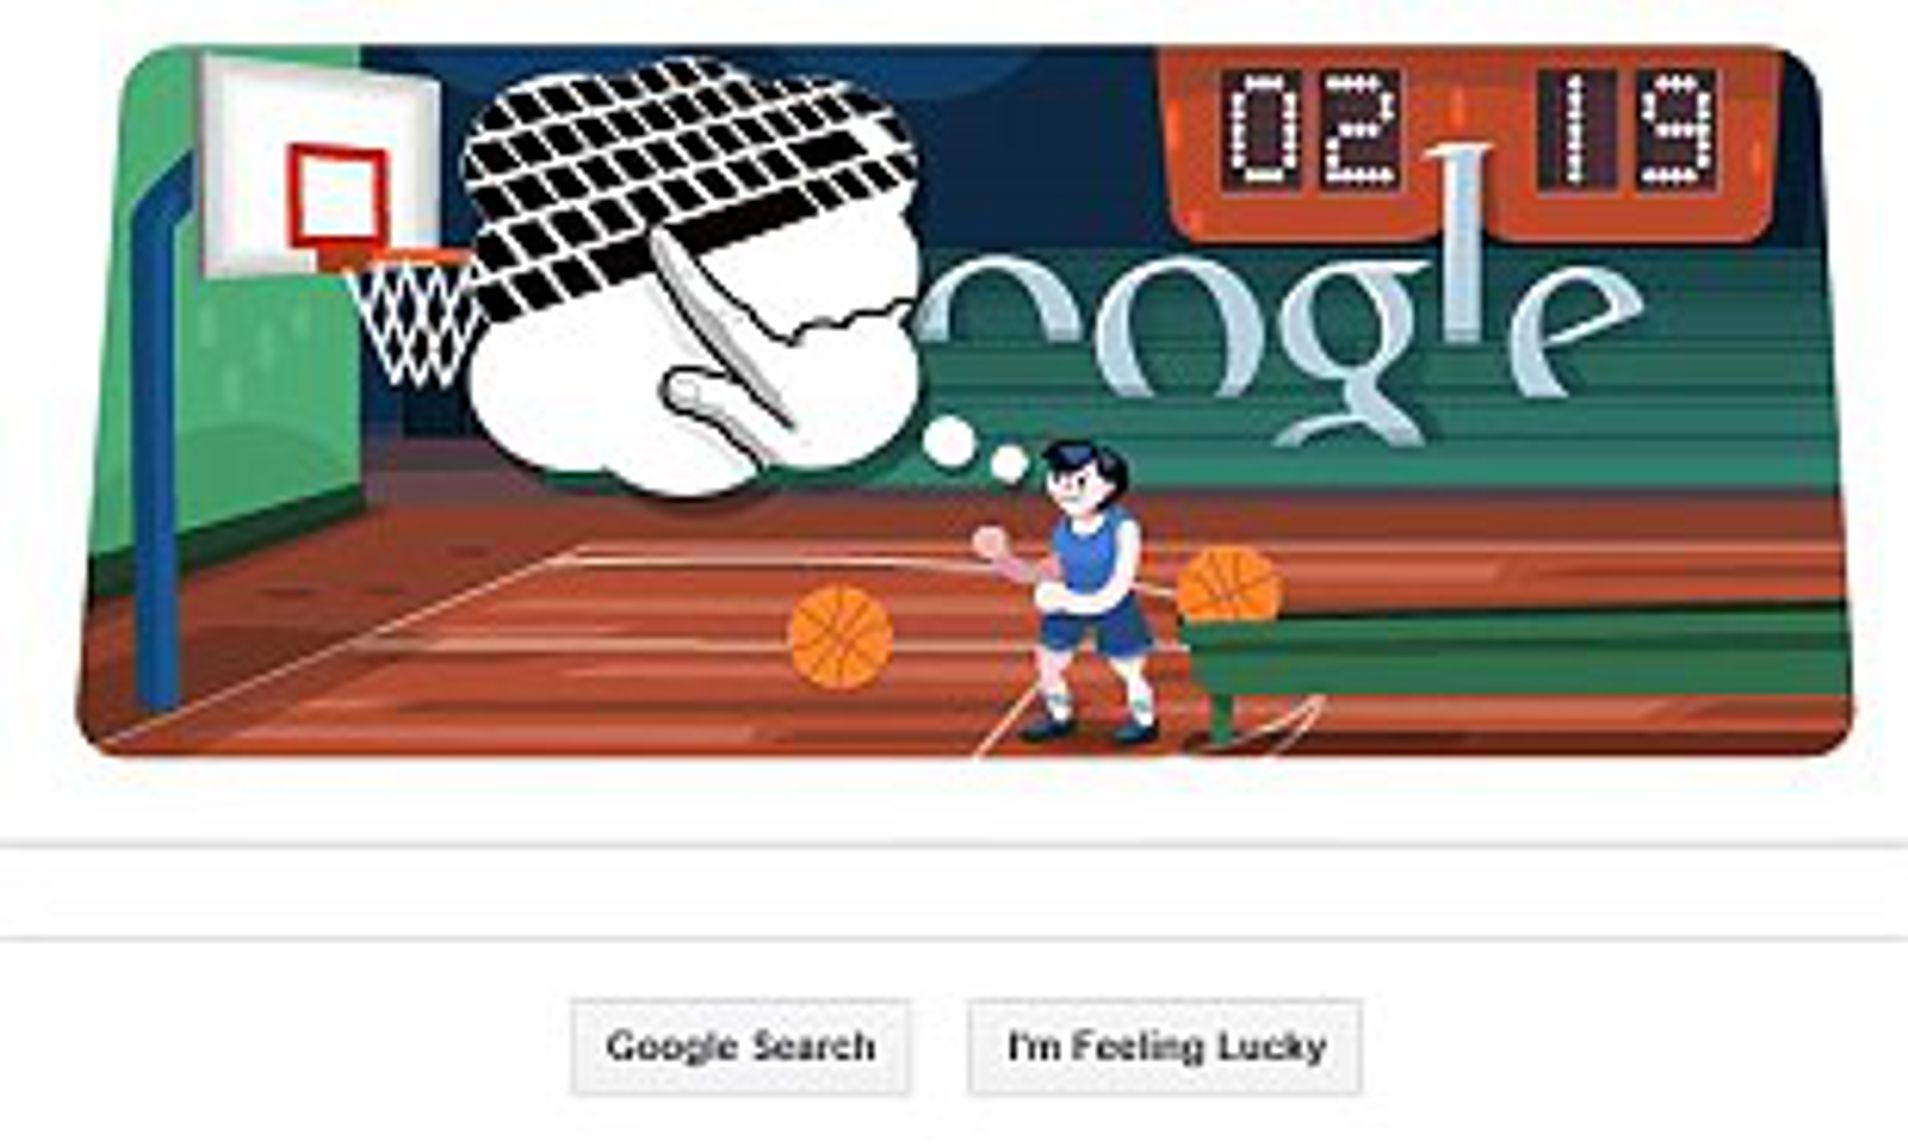 An interactive Google Doodle game where a character is dribbling a basketball, with a scoreboard indicating a score of 19 to 2.